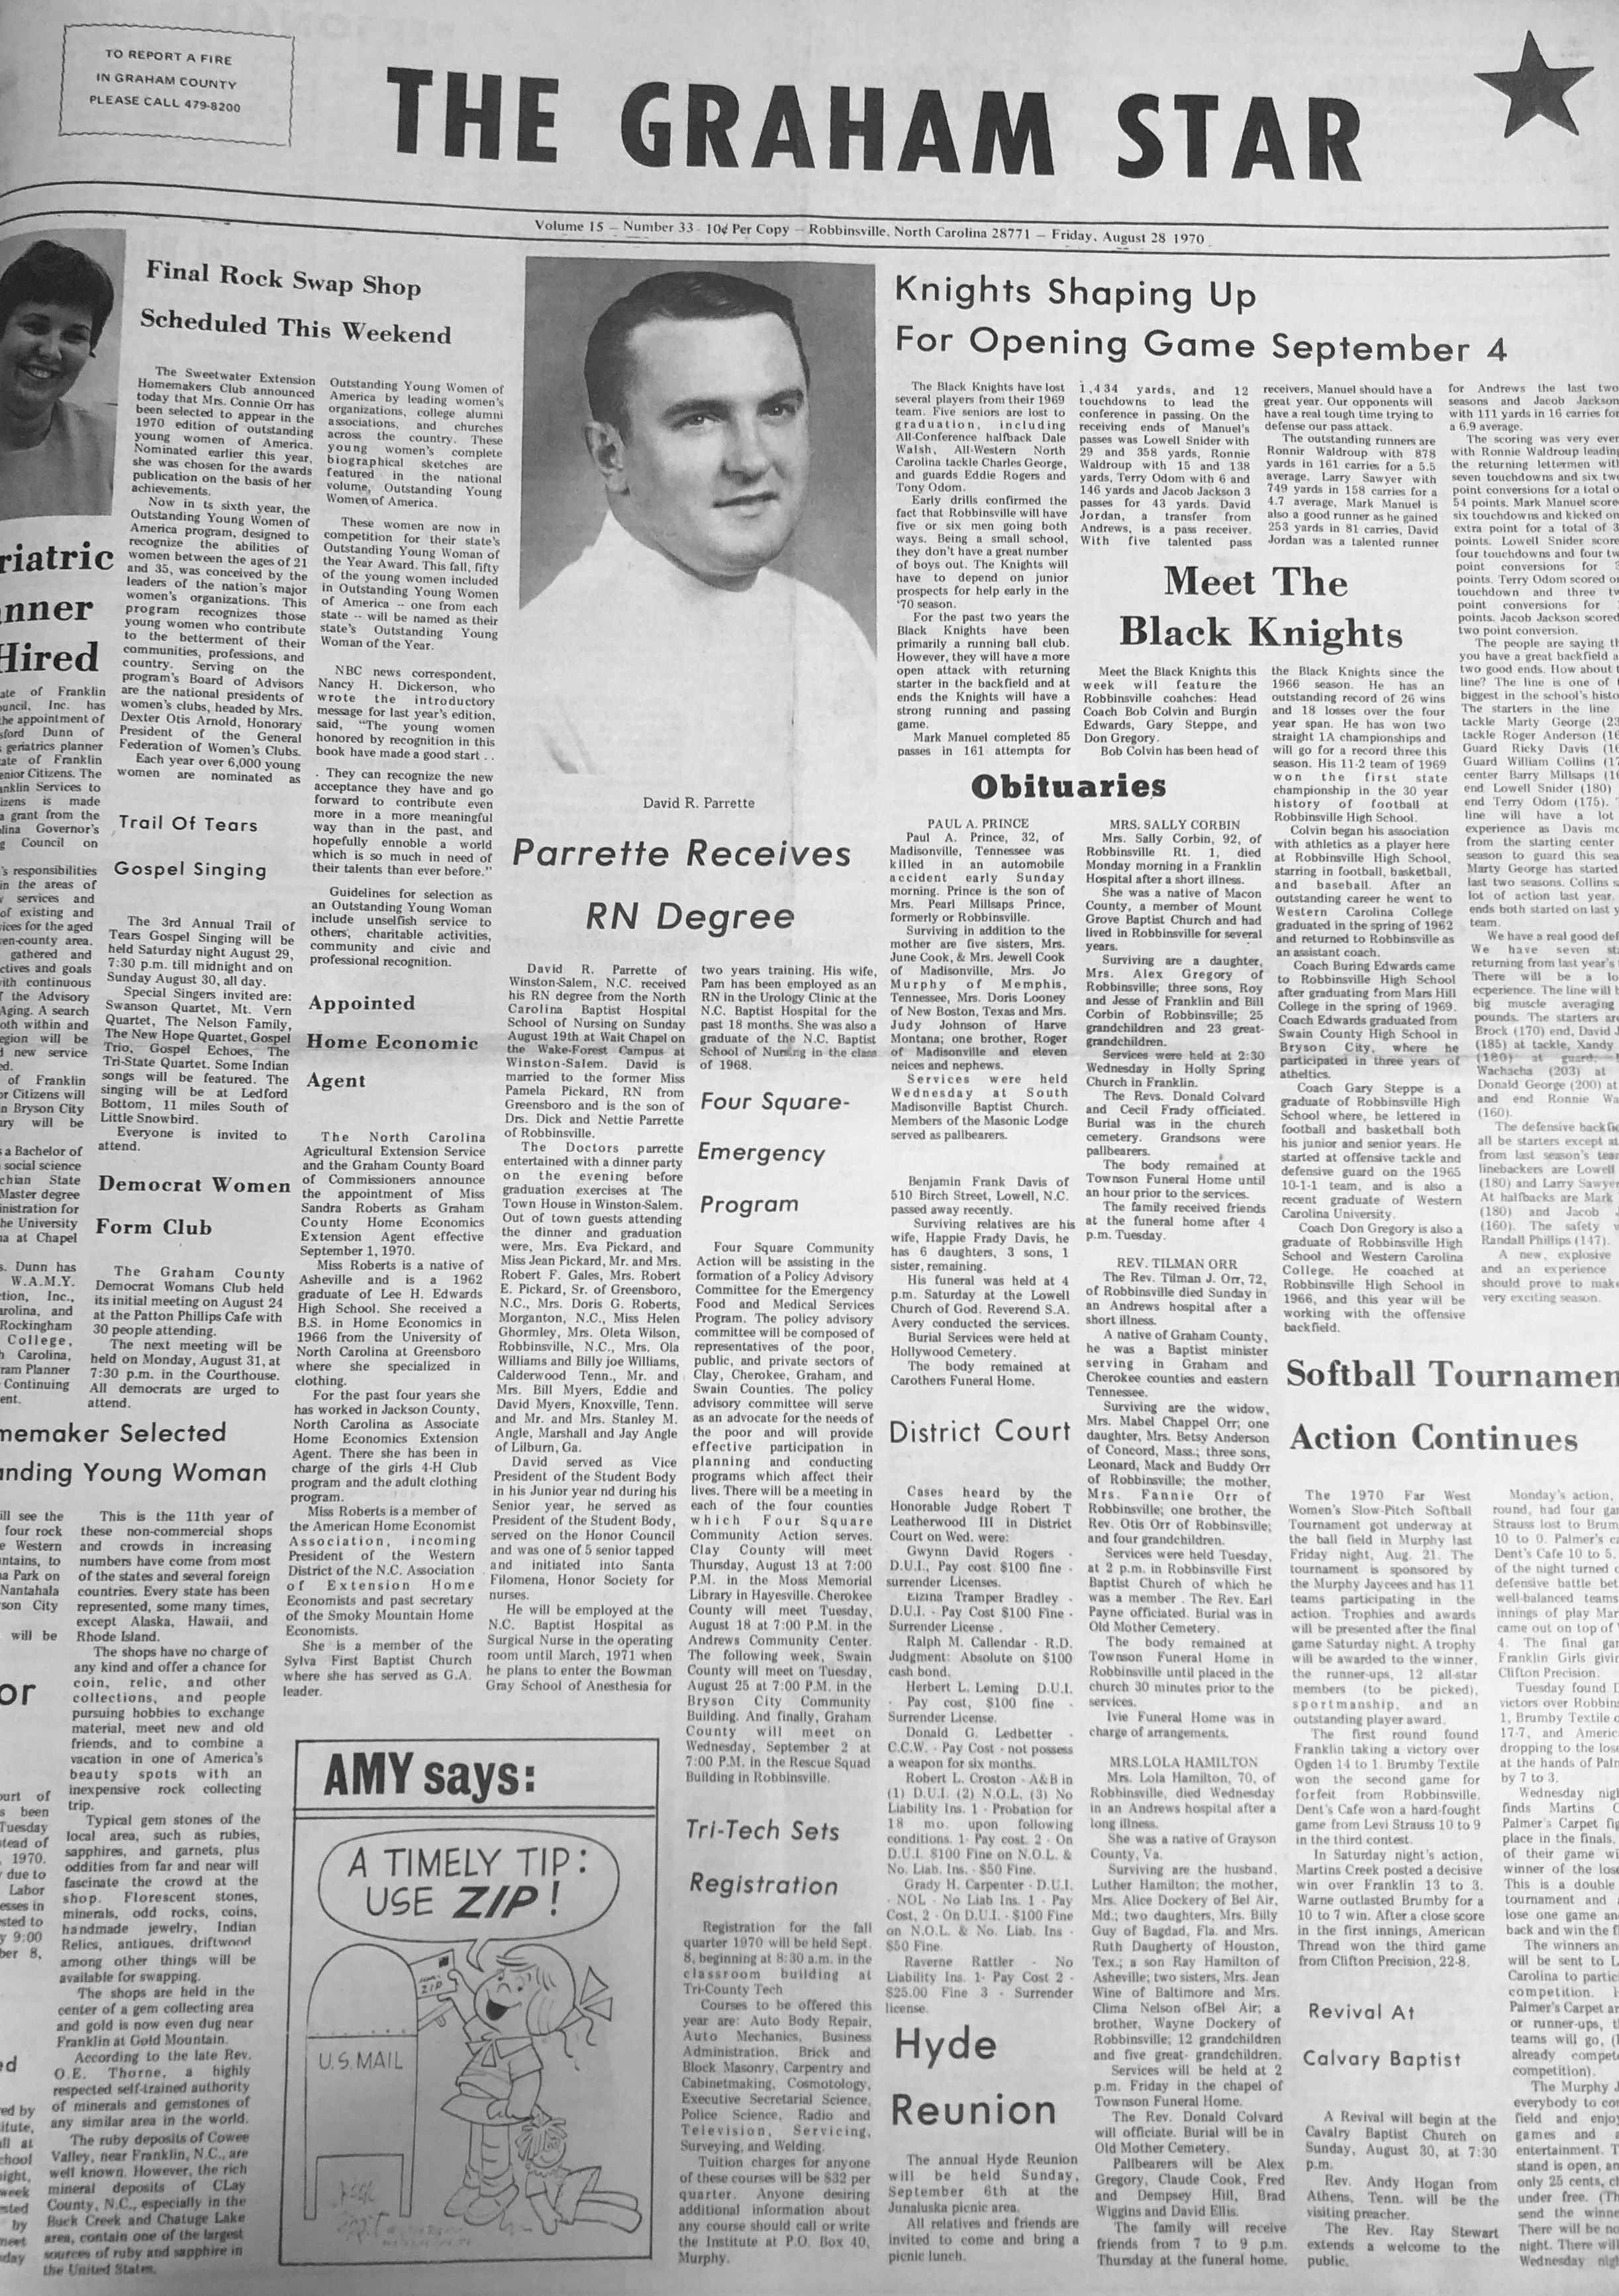 The Graham Star’s front cover from 50 years ago (Aug. 28, 1970).